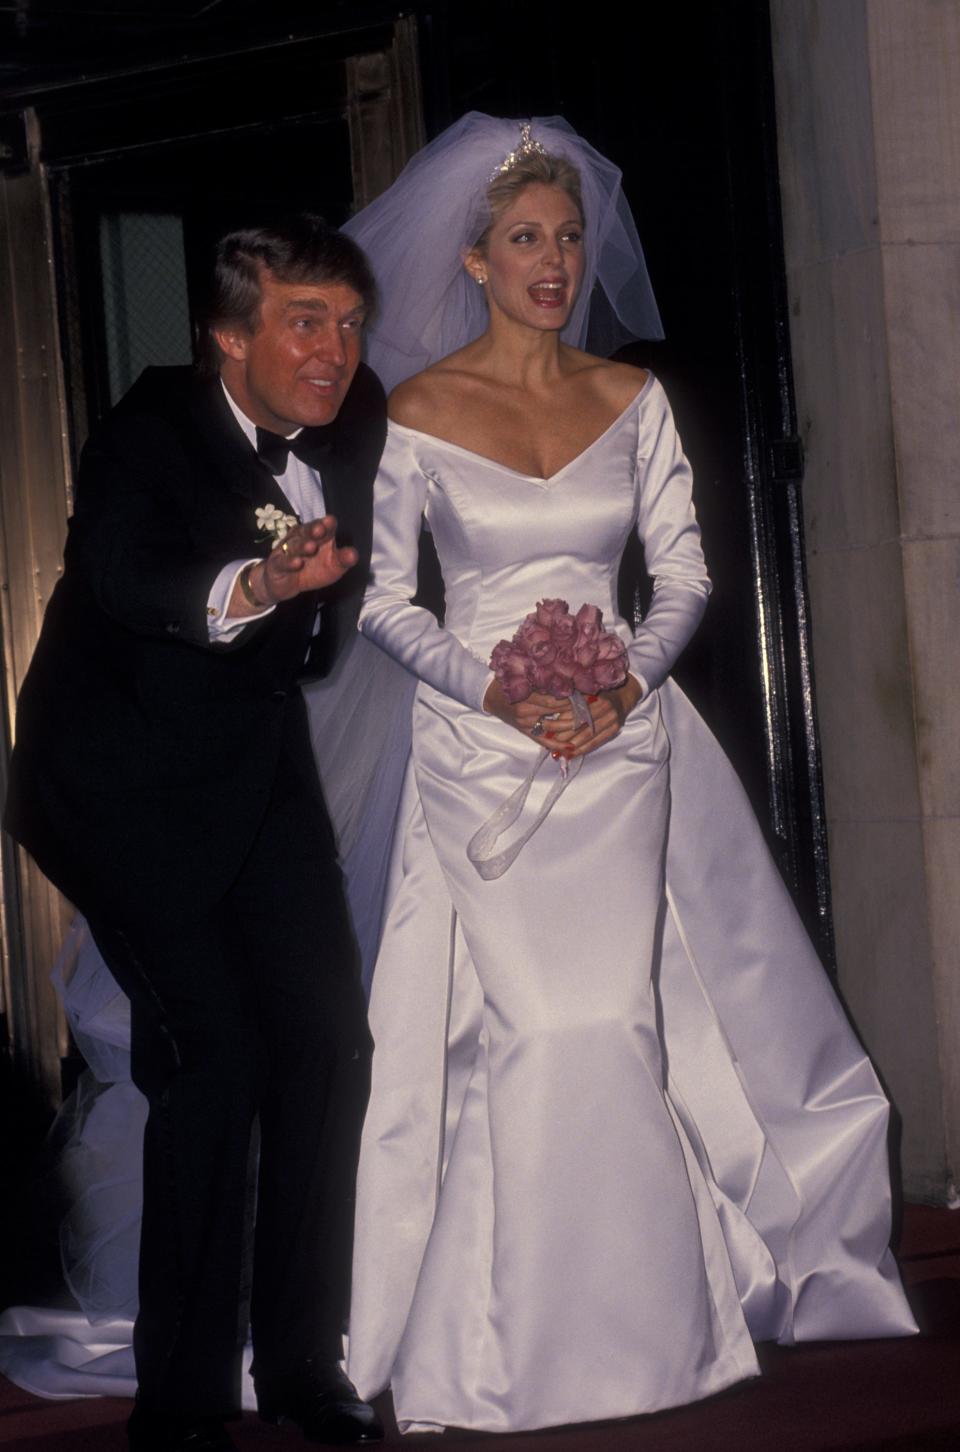 Donald Trump and Marla Maples at their wedding